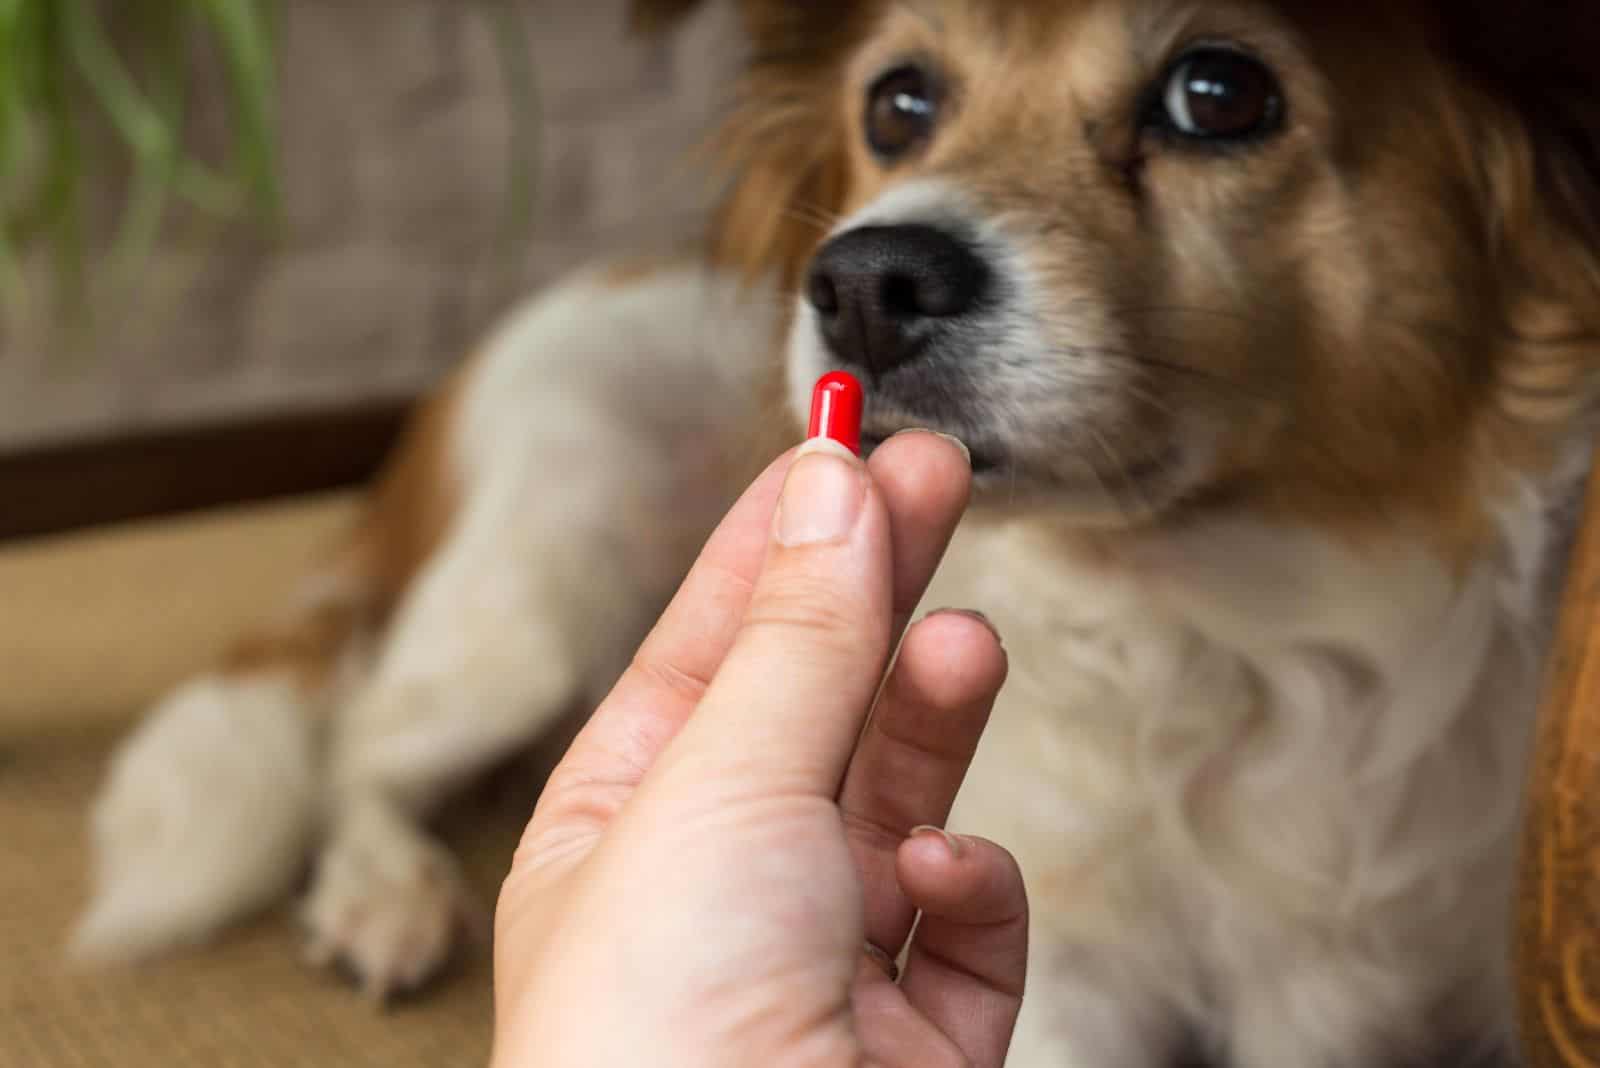 the woman gives the dog a pill